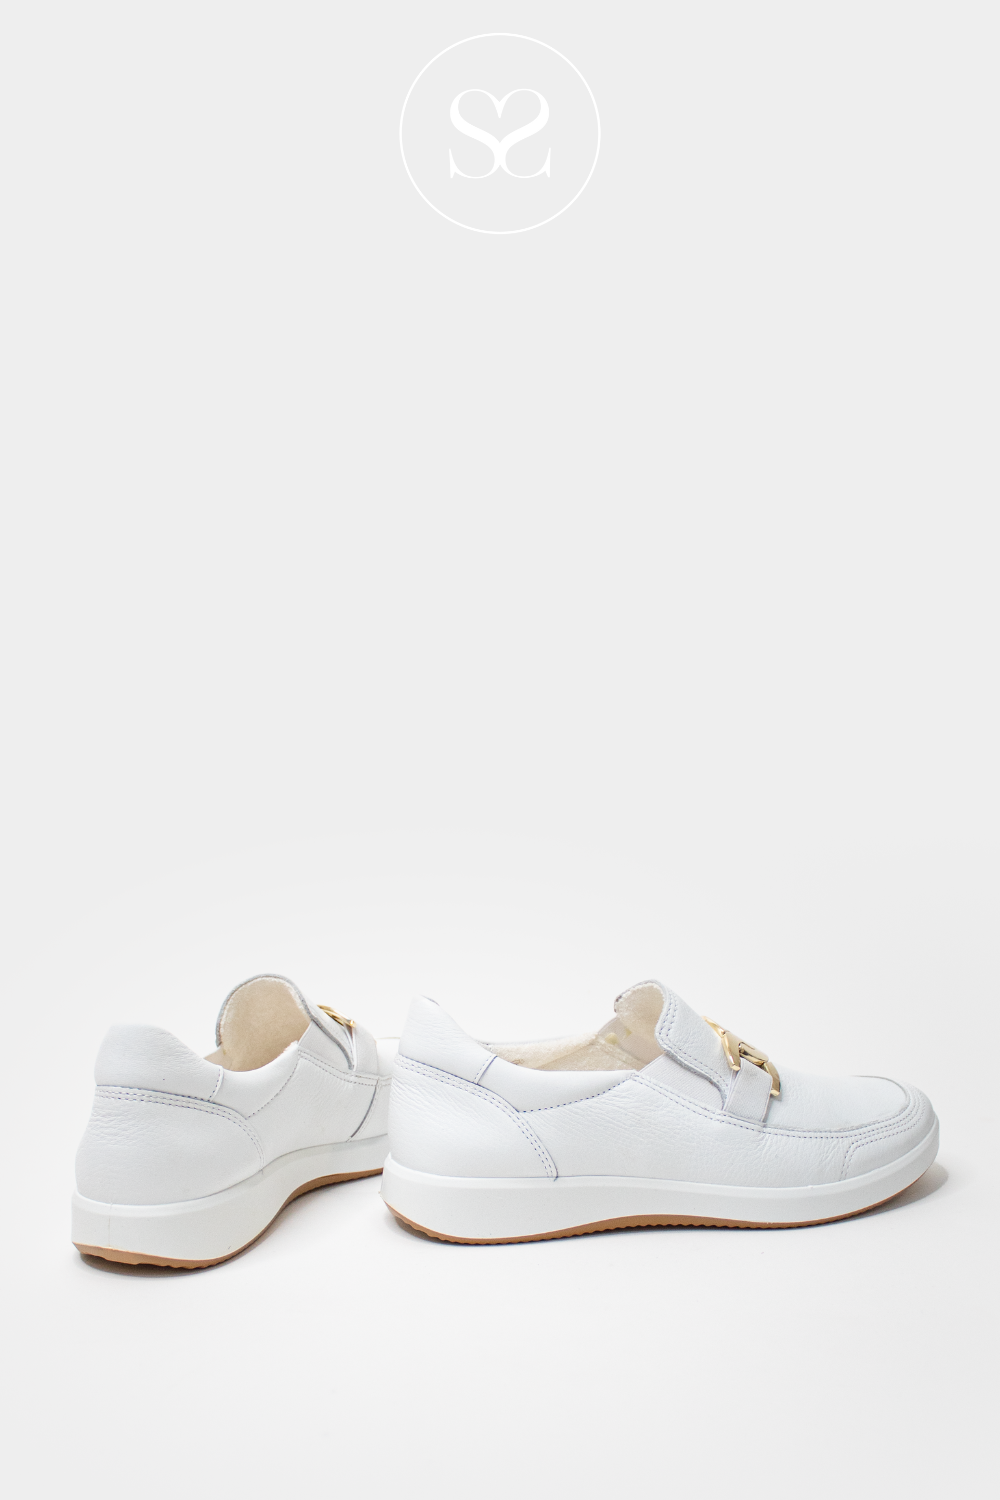 ARA 12-23911 WHITE LEATHER PULL ON TRAINER/LOAFER WITH GOLD BUCKLE DETAIL.